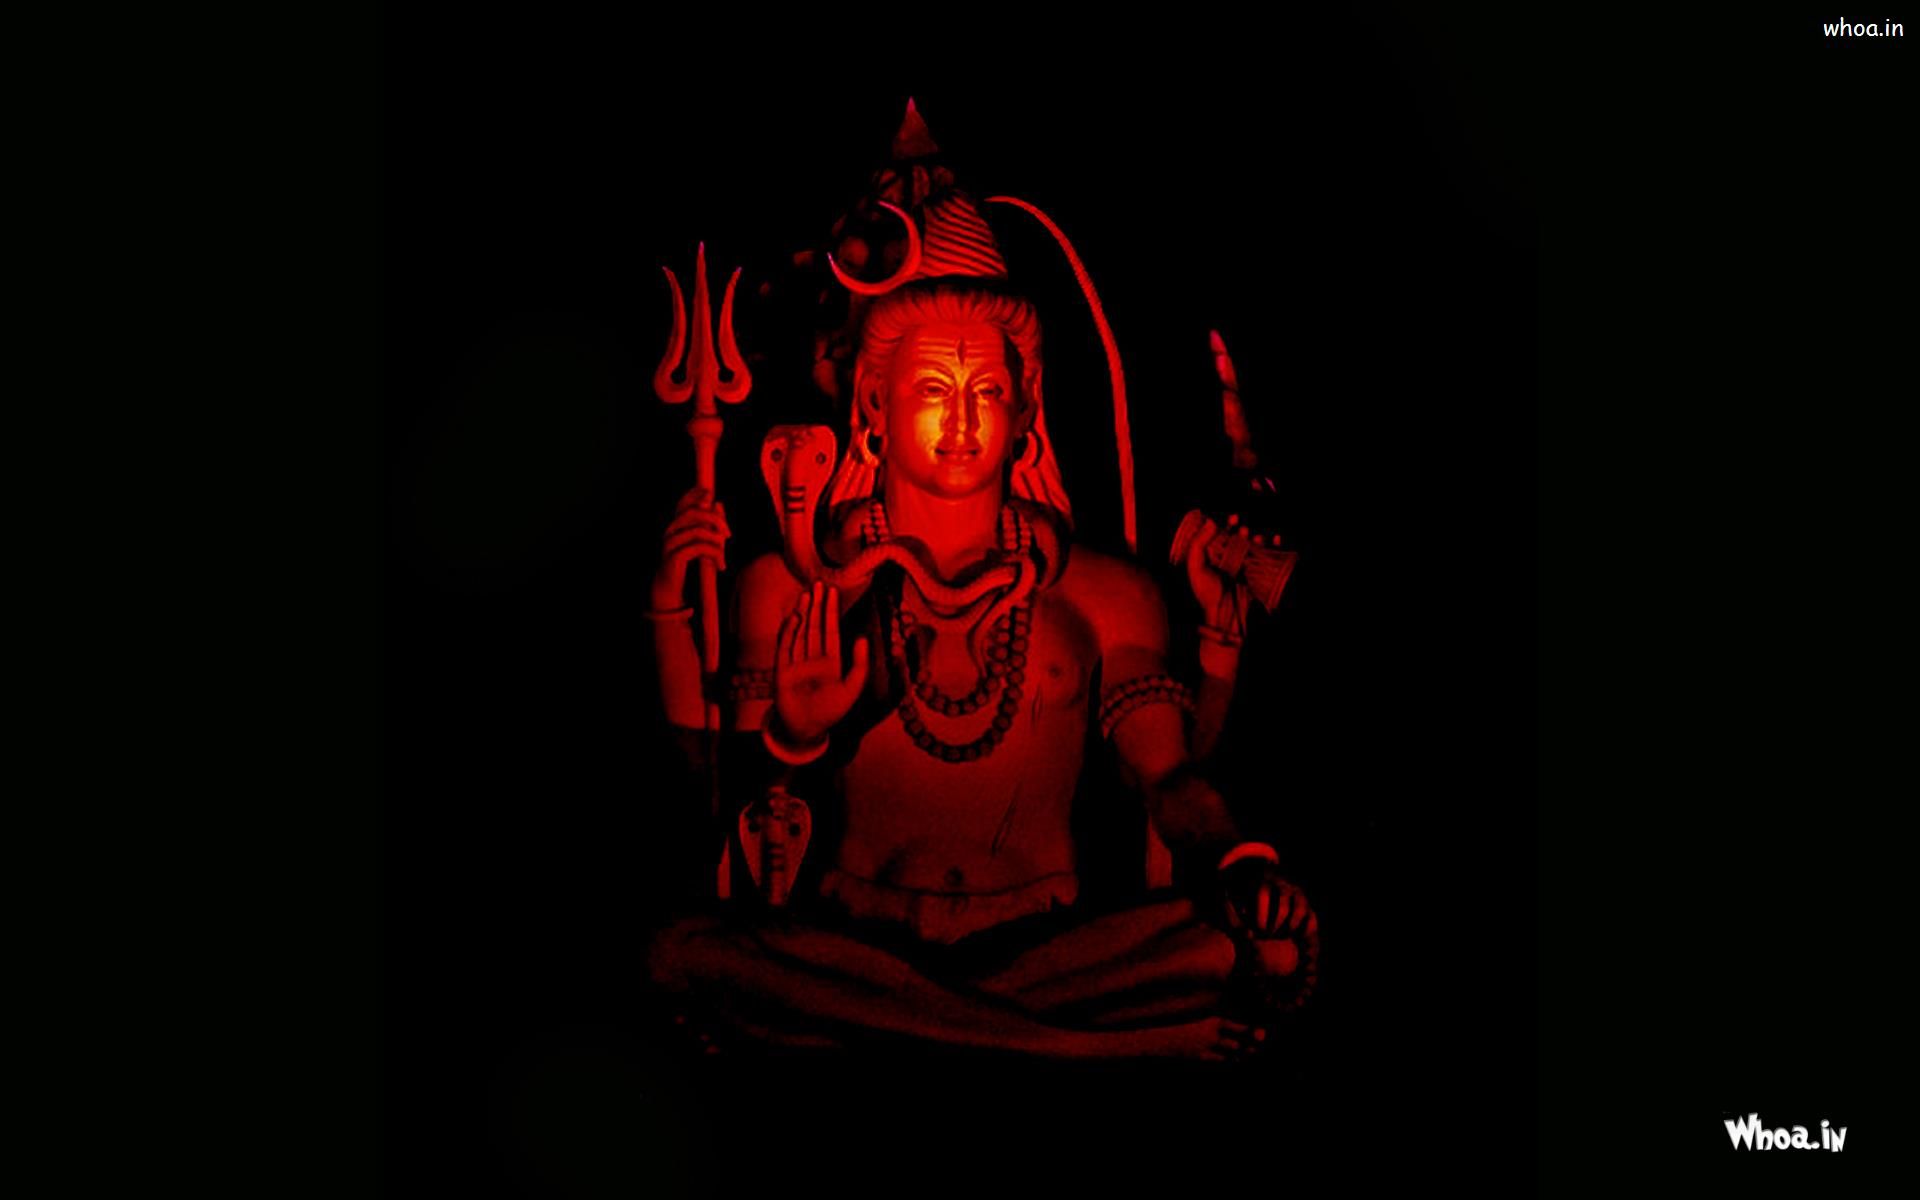 Somnath Lord Shiva Statue With Red Light Flash With Full Dark Back